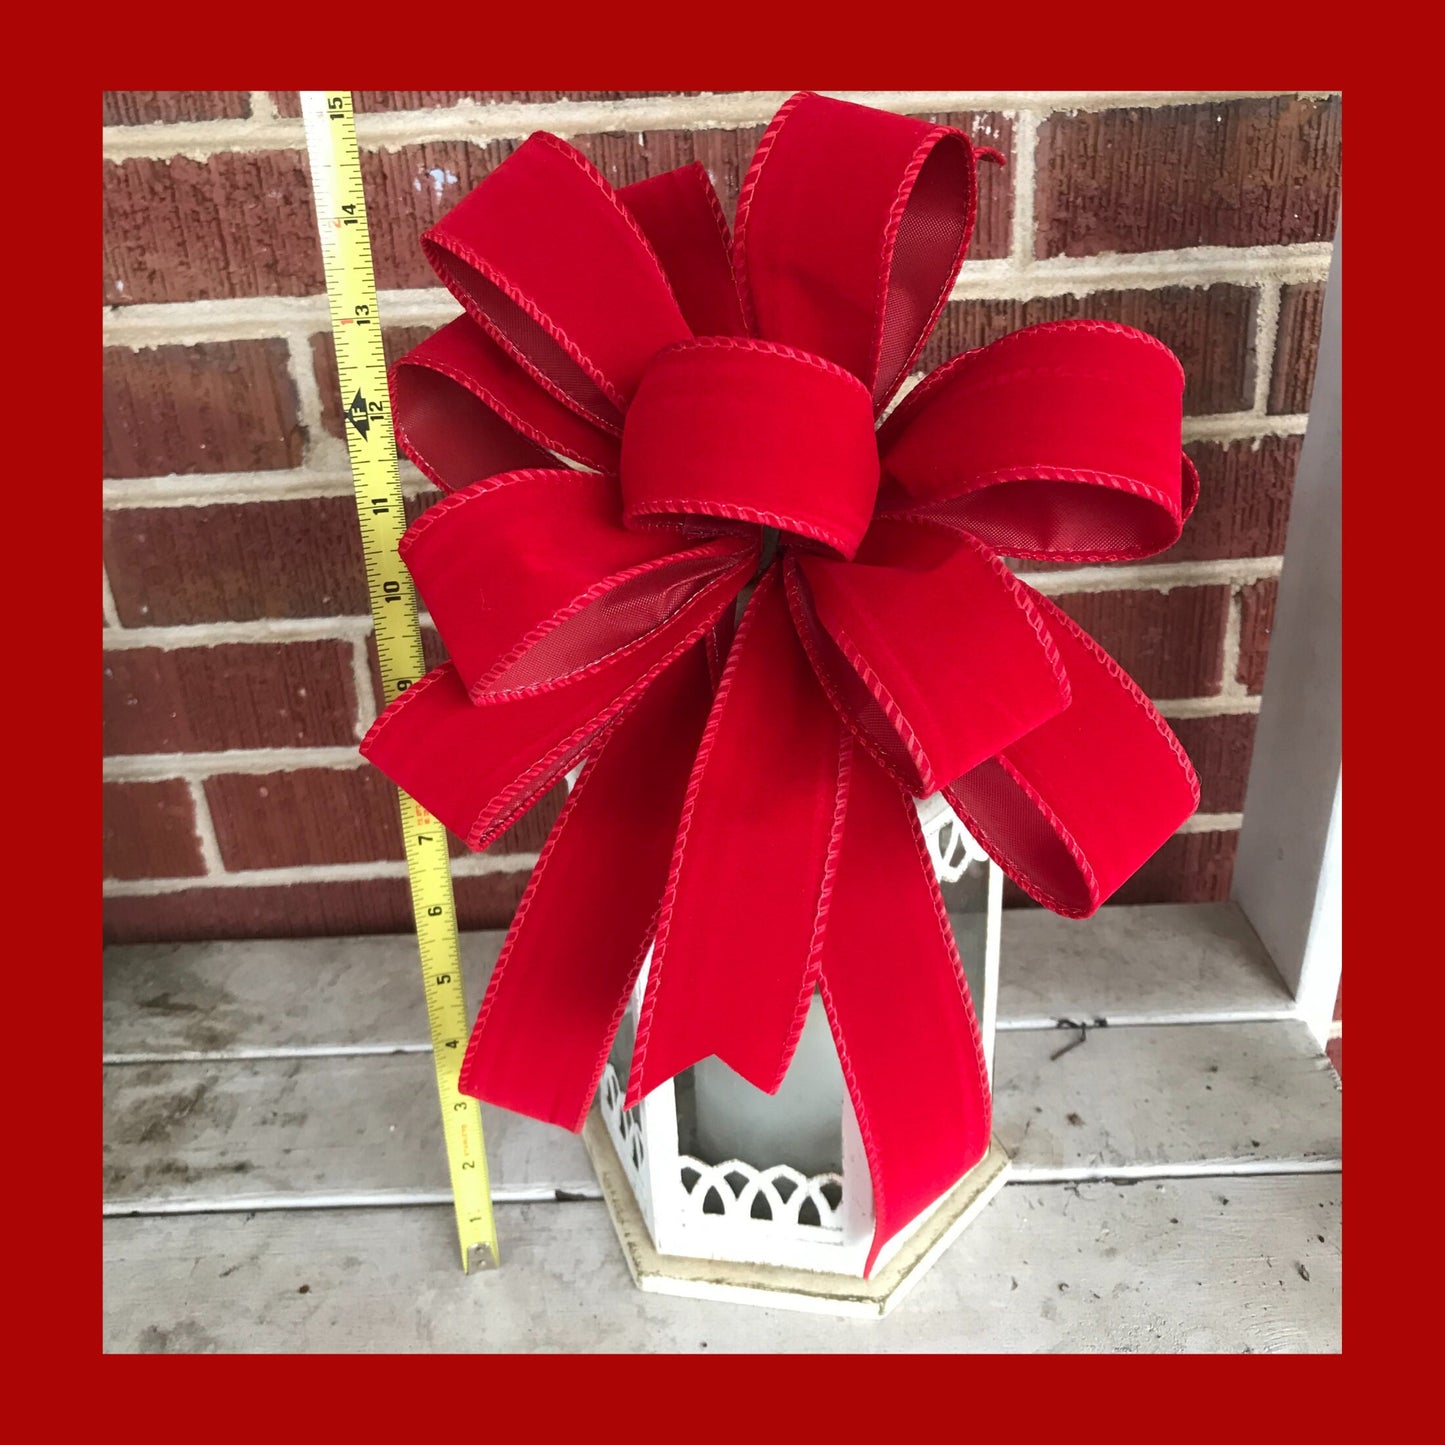 OUTDOOR Red Velvet Christmas Lantern bow, red velvet bow with and without plastic liner